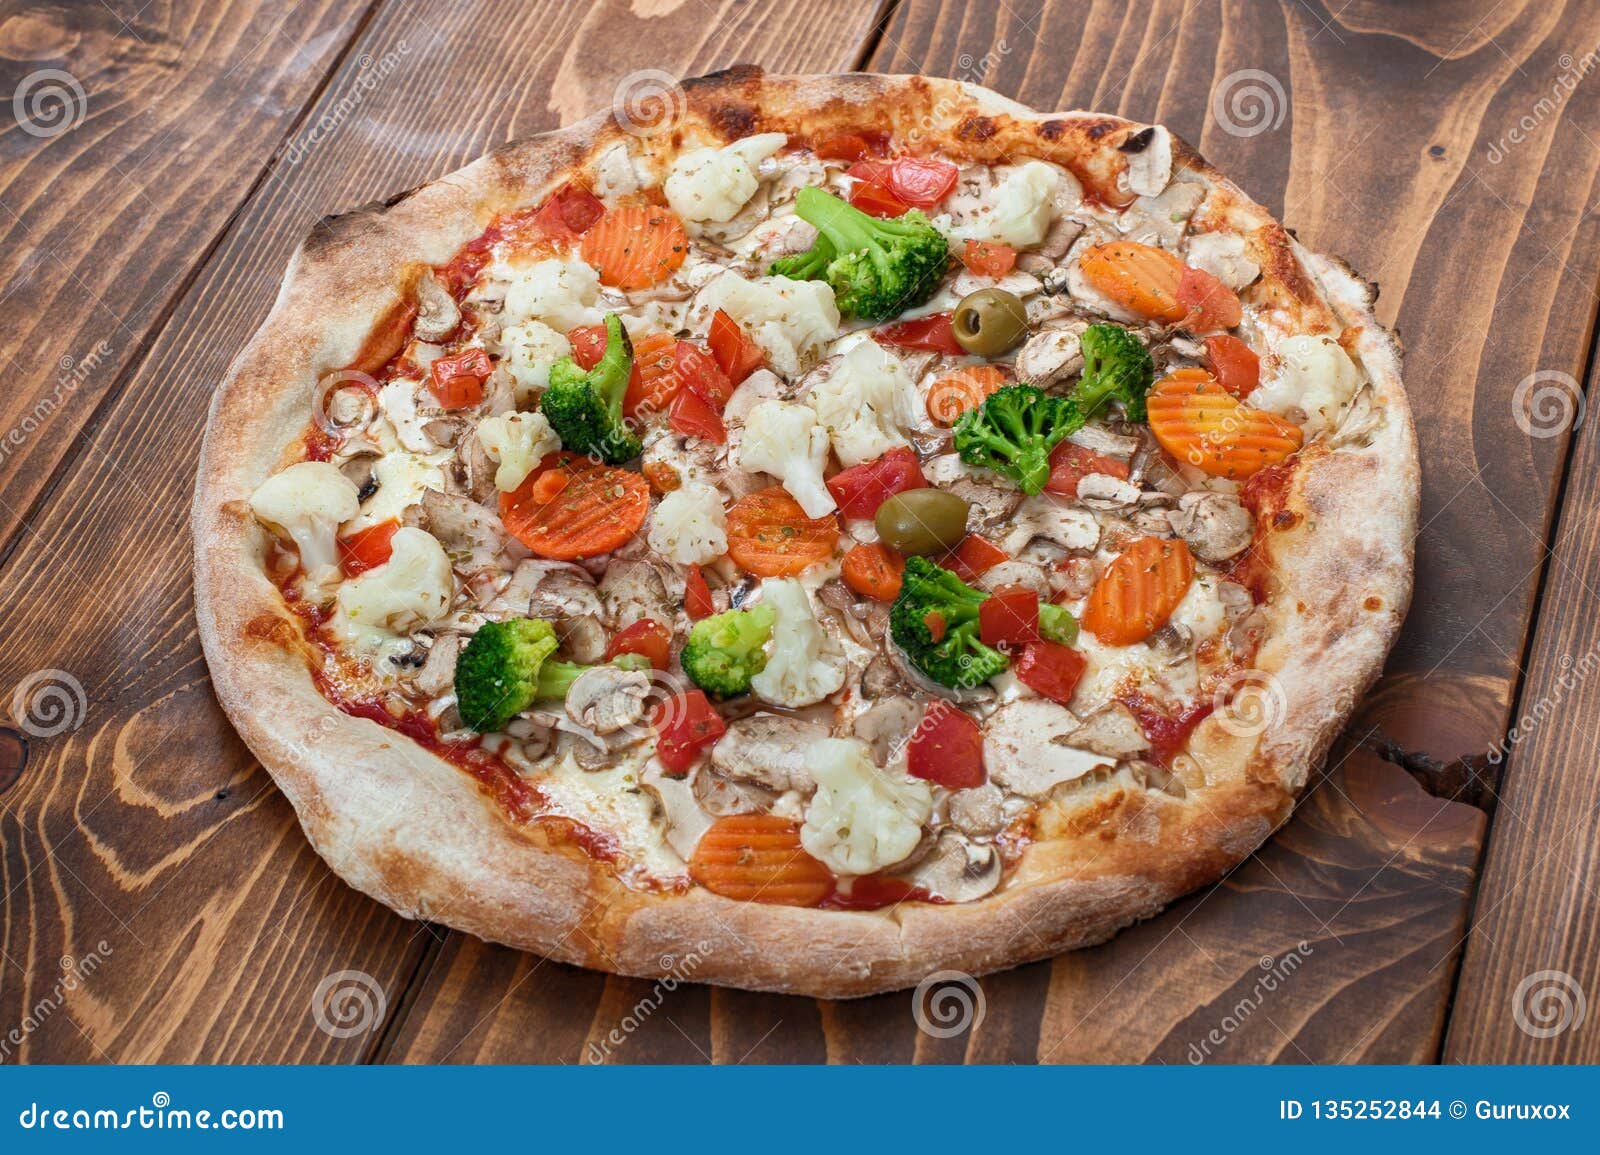 pizza vegetariana on wooden background, side view